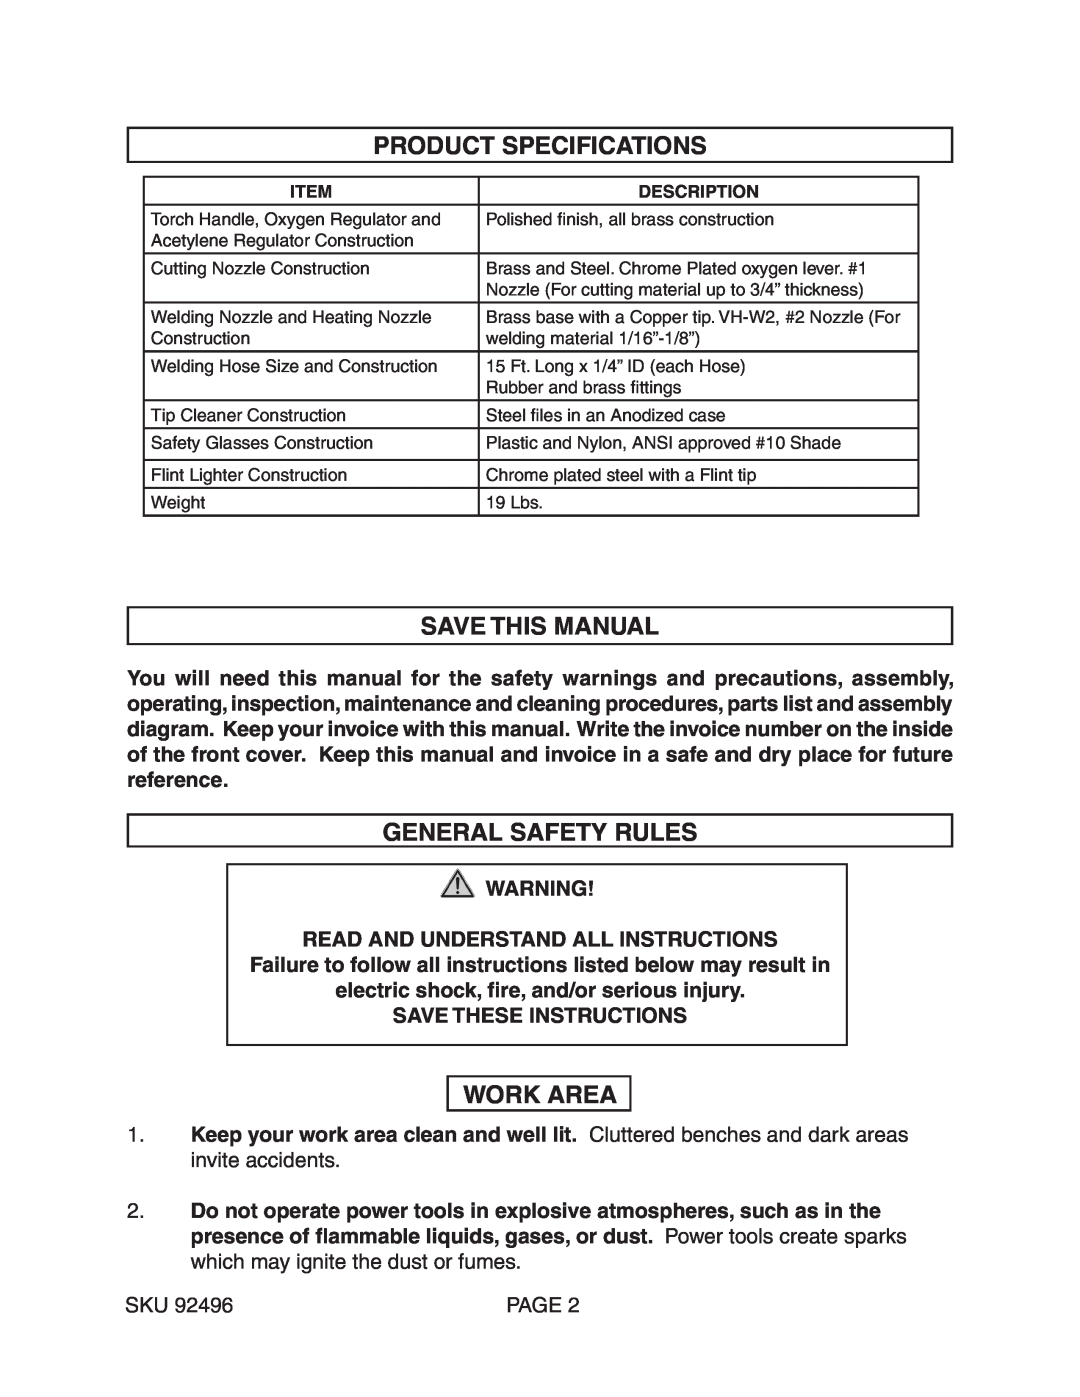 Chicago Electric 92496 operating instructions Product Specifications, Save This Manual, General Safety Rules, Work Area 